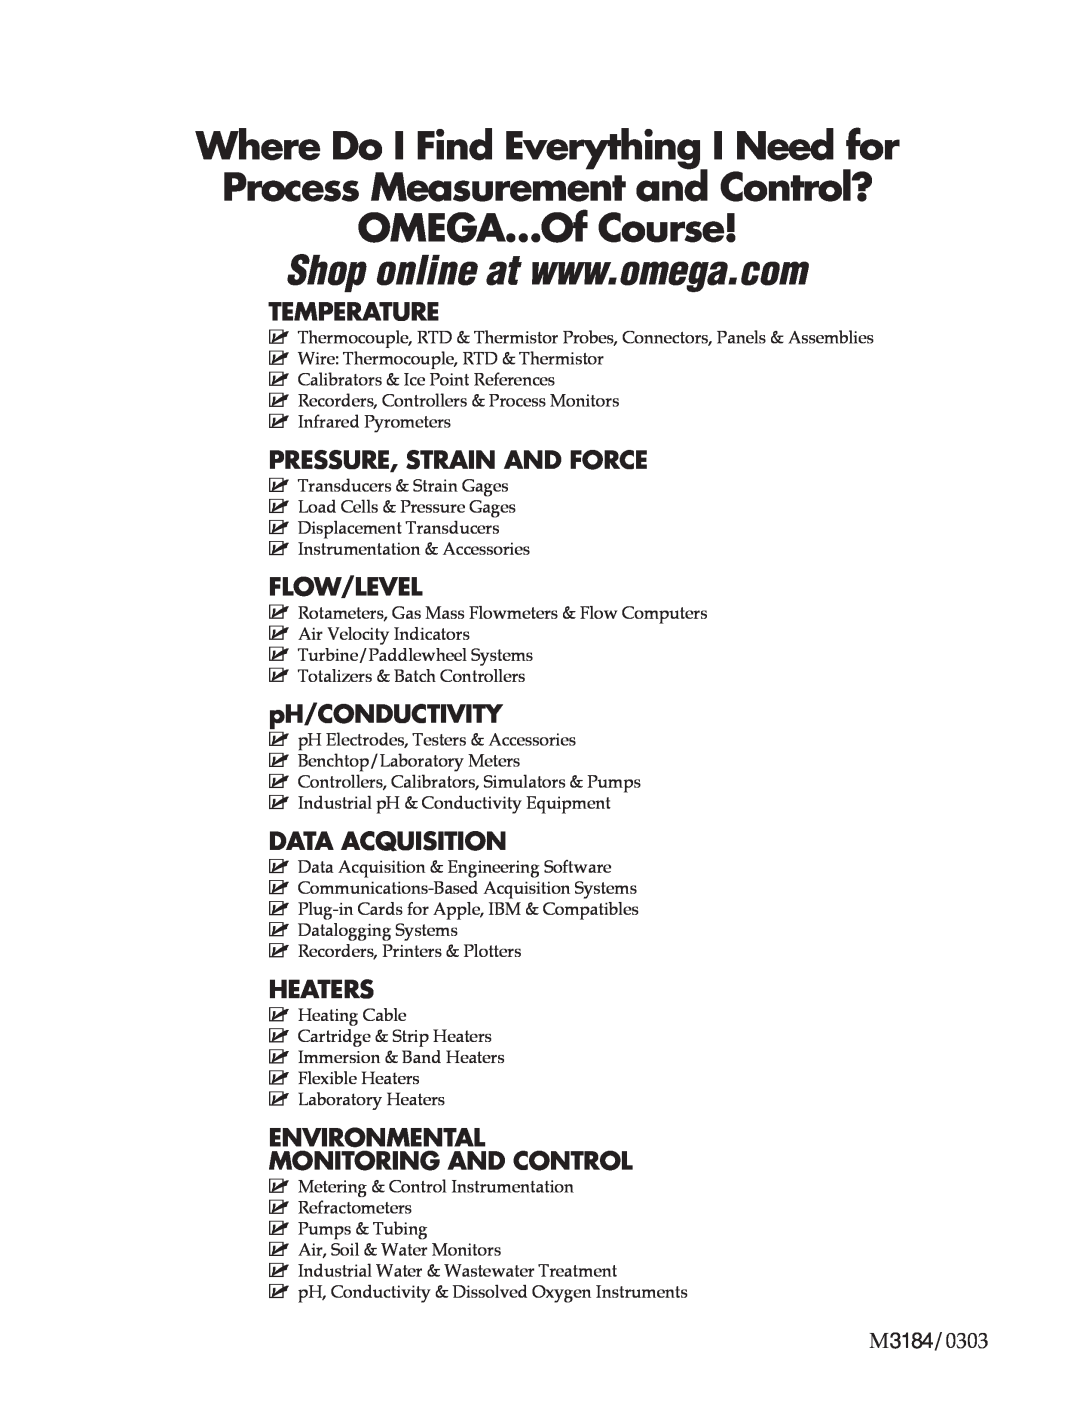 Omega Engineering RS-422/485 manual OMEGA…Of Course, Temperature, Pressure, Strain And Force, Flow/Level, pH/CONDUCTIVITY 